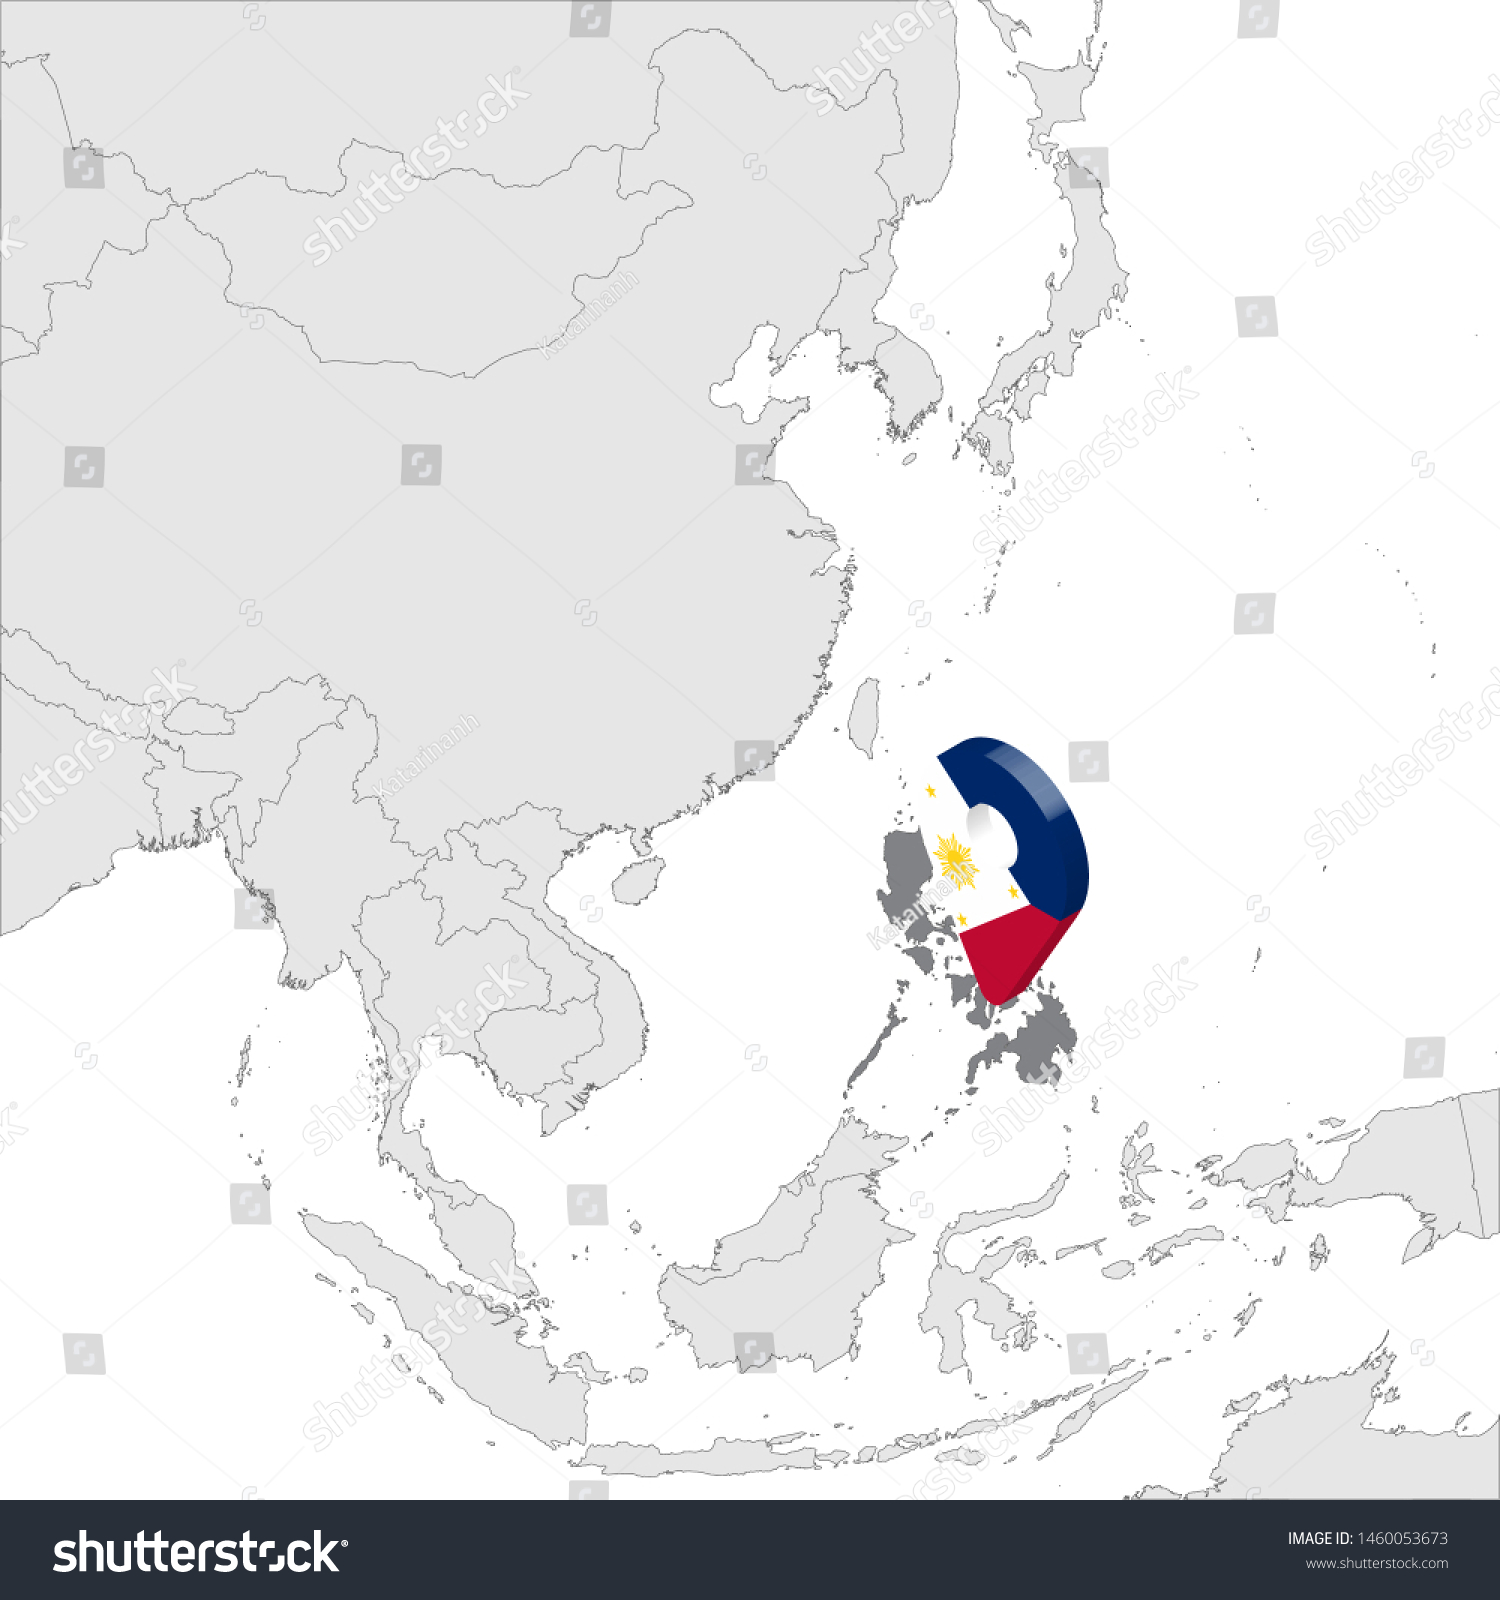 Philippines On Asia Map Philippines Location Map On Map Asia Stock Vector (Royalty Free) 1460053673  | Shutterstock